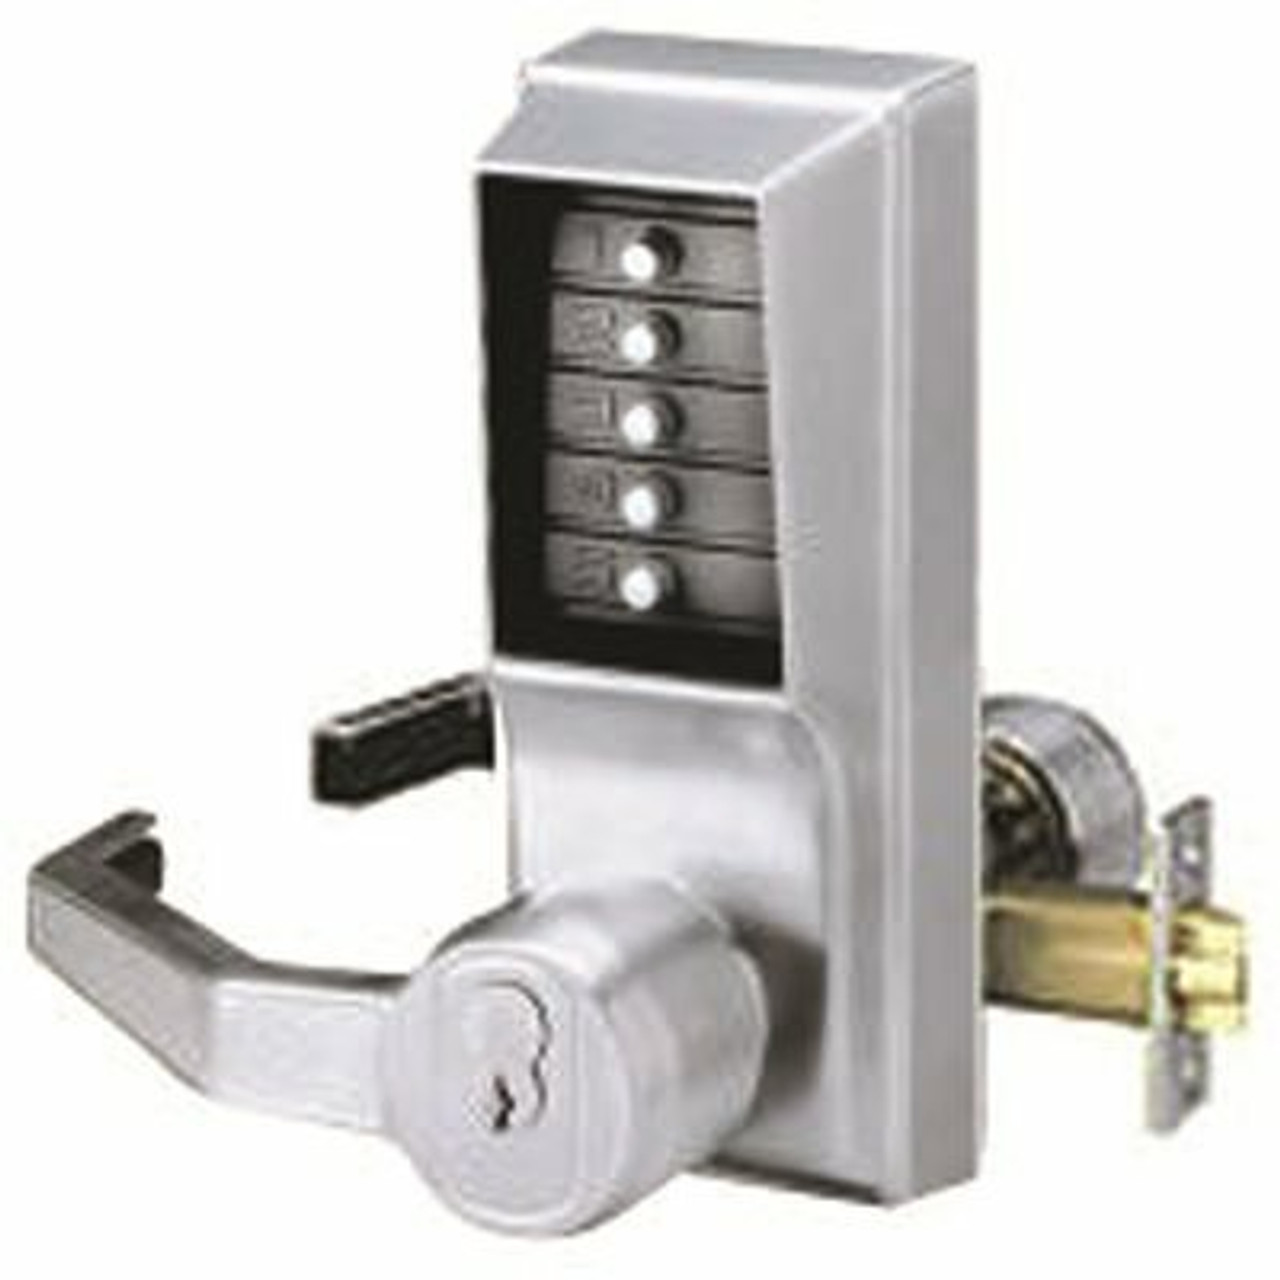 Kaba Access Control Kaba Access L1000 Pb Lever Trim Lh Medeco/Yale Access